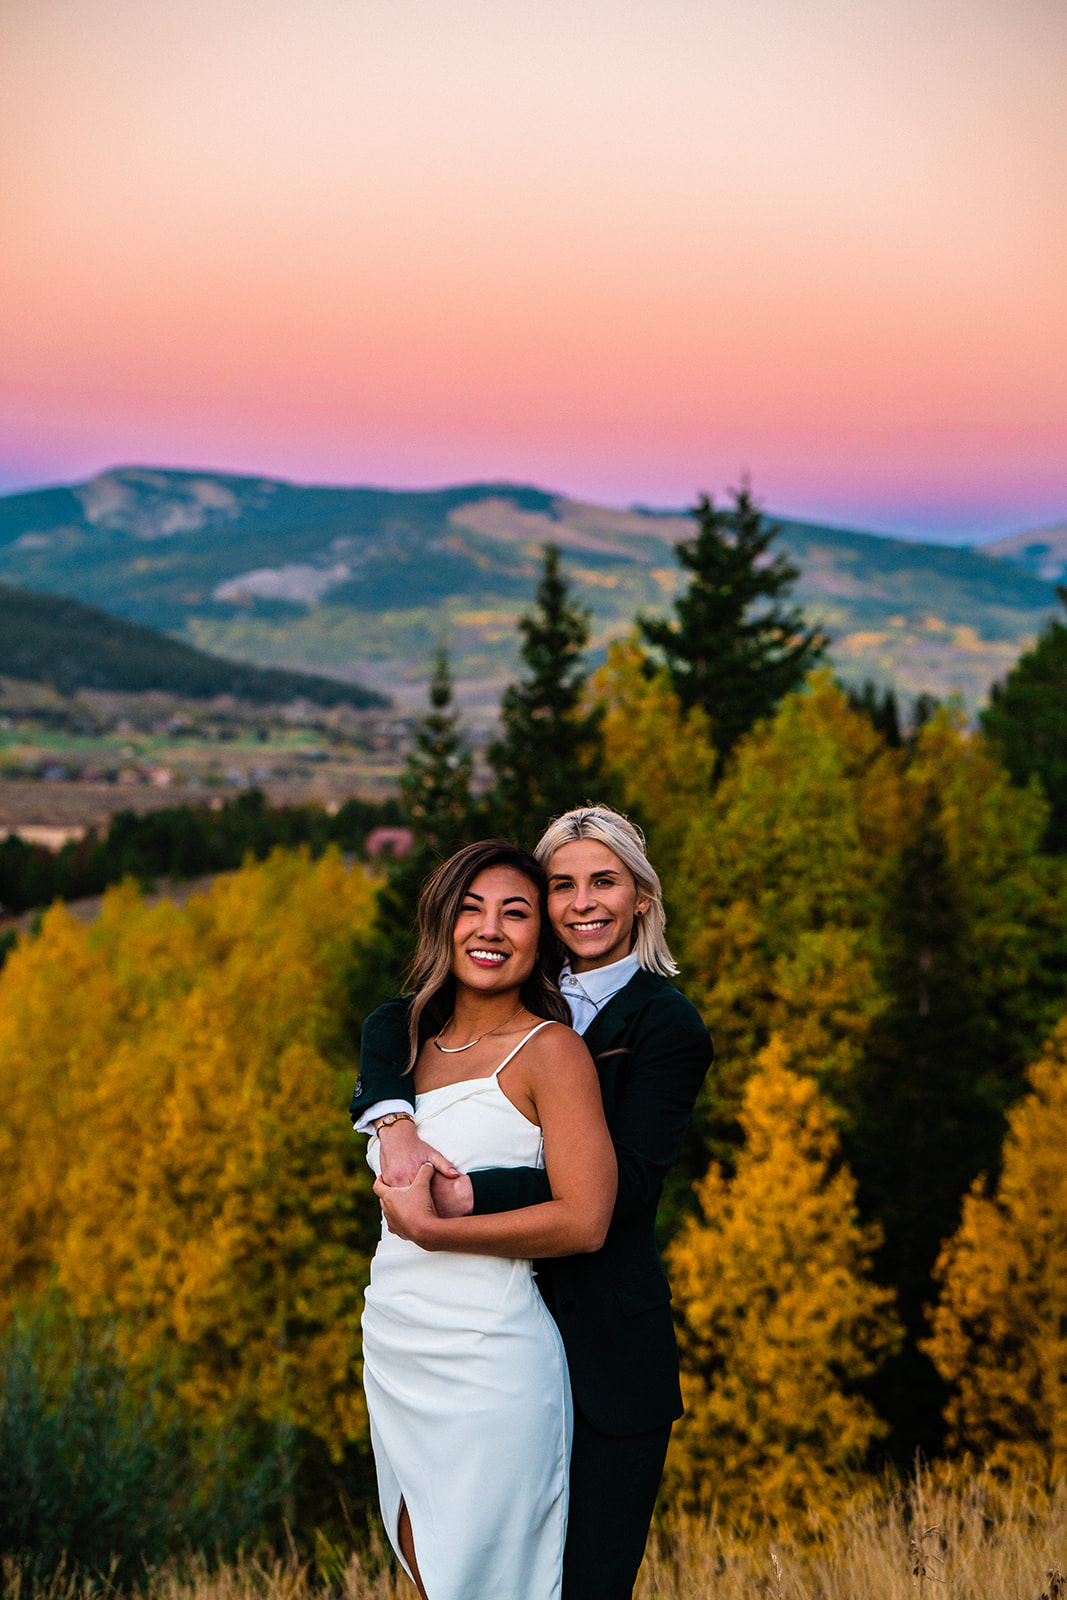 Lesbian Bridal Portraits at Crested Butte in Colorado during sunset